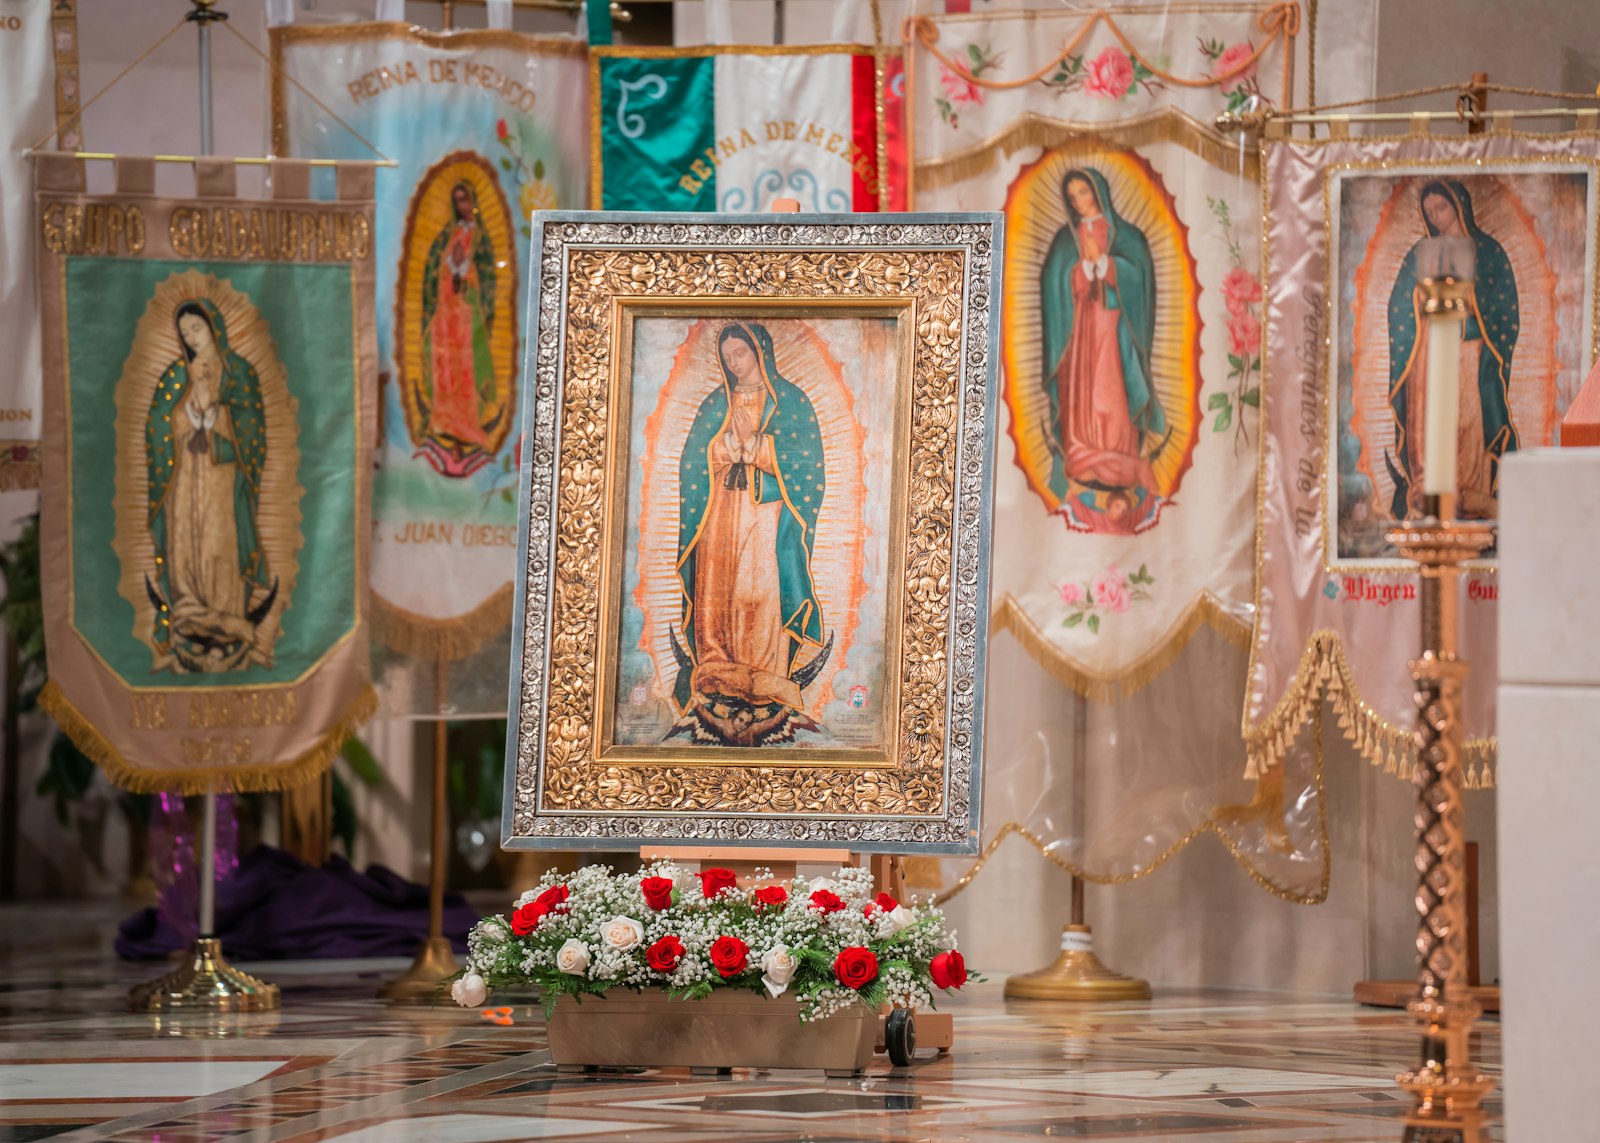 In this annual celebration, an altar dedicated to the Virgin of Guadalupe is erected. The image, adorned with flowers, comes from the Basilica of Mexico, recreating an atmosphere of the festivities experienced at the foot of Cerro del Tepeyac (Tepeyac Hill).